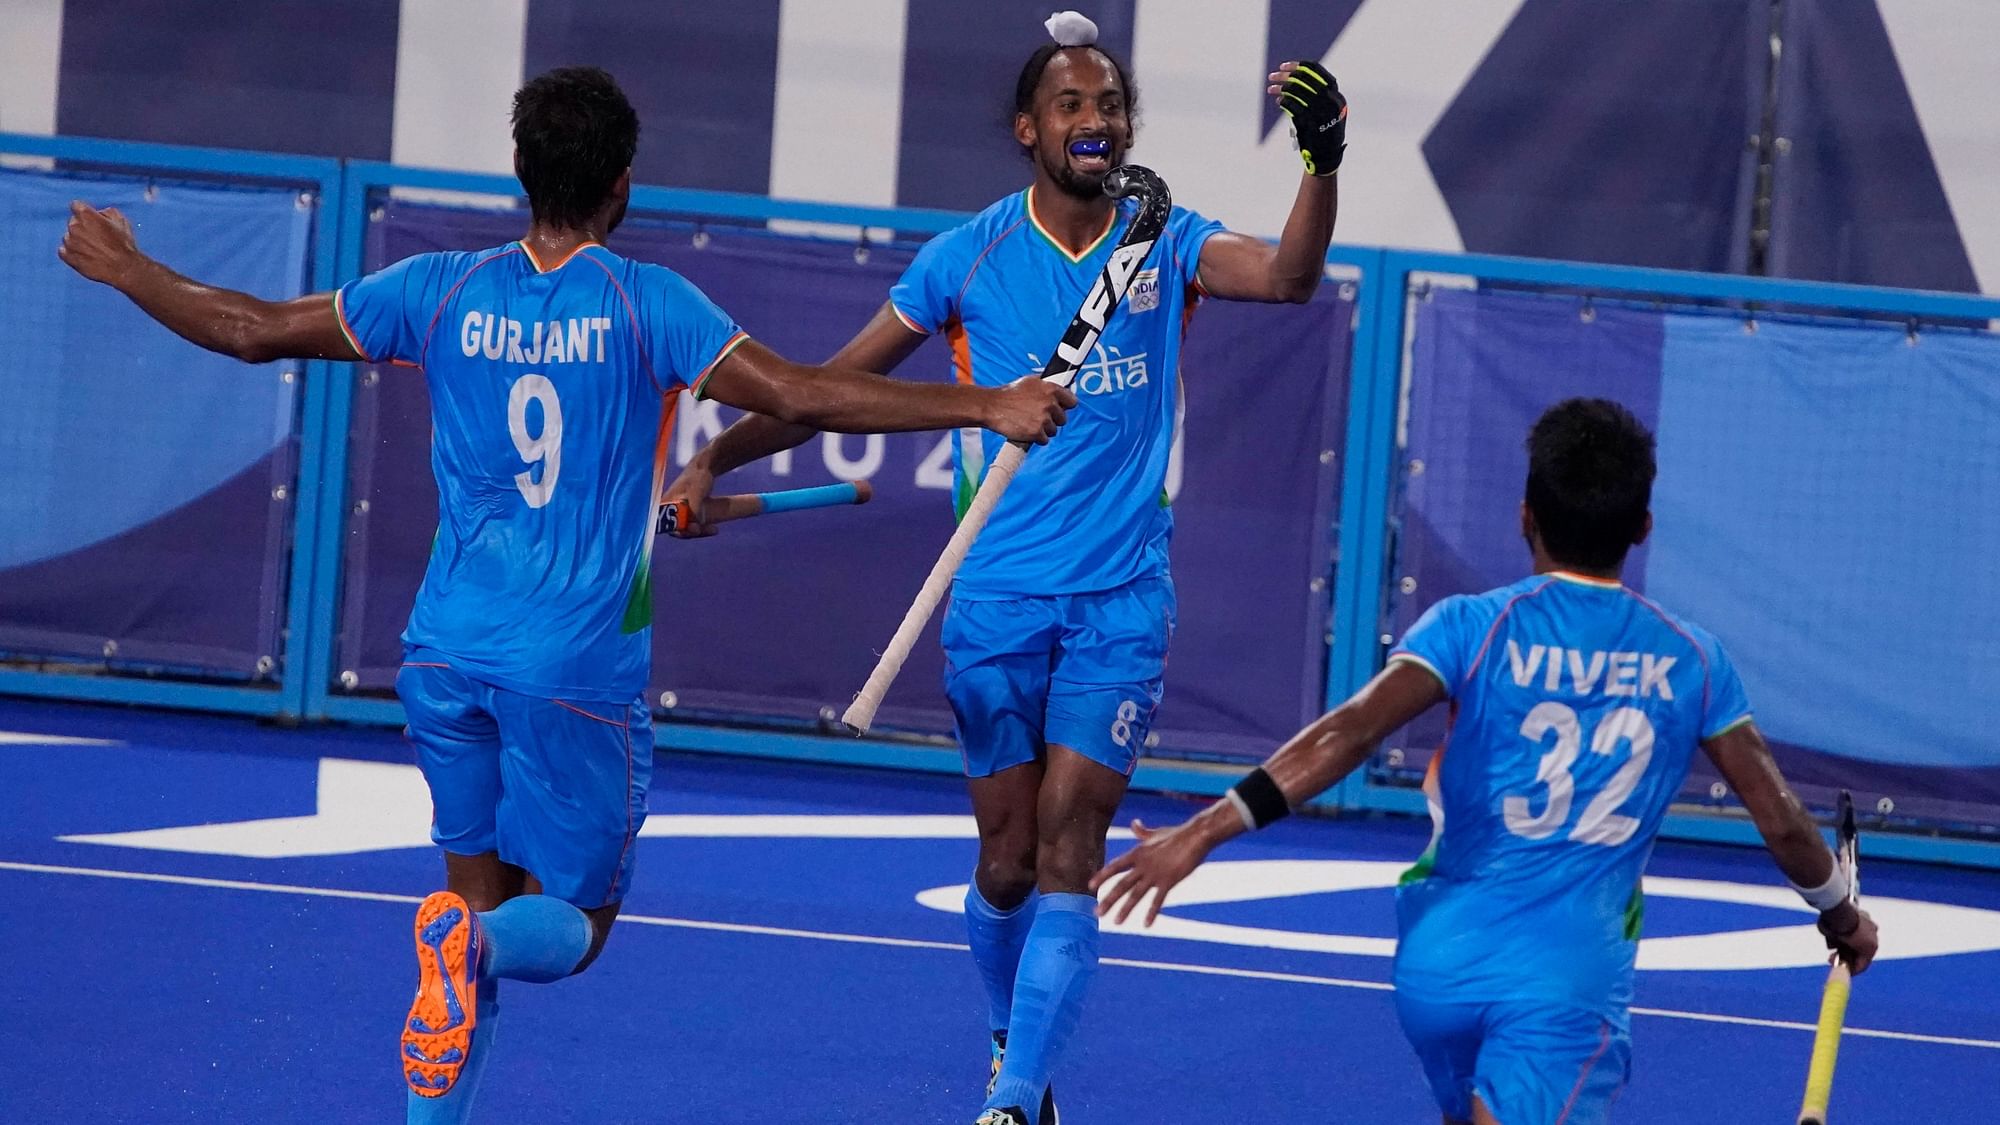 Punjab announces Rs 1 crore reward for the states 10 hockey players after Bronze medal win at the 2021 Tokyo Olympics